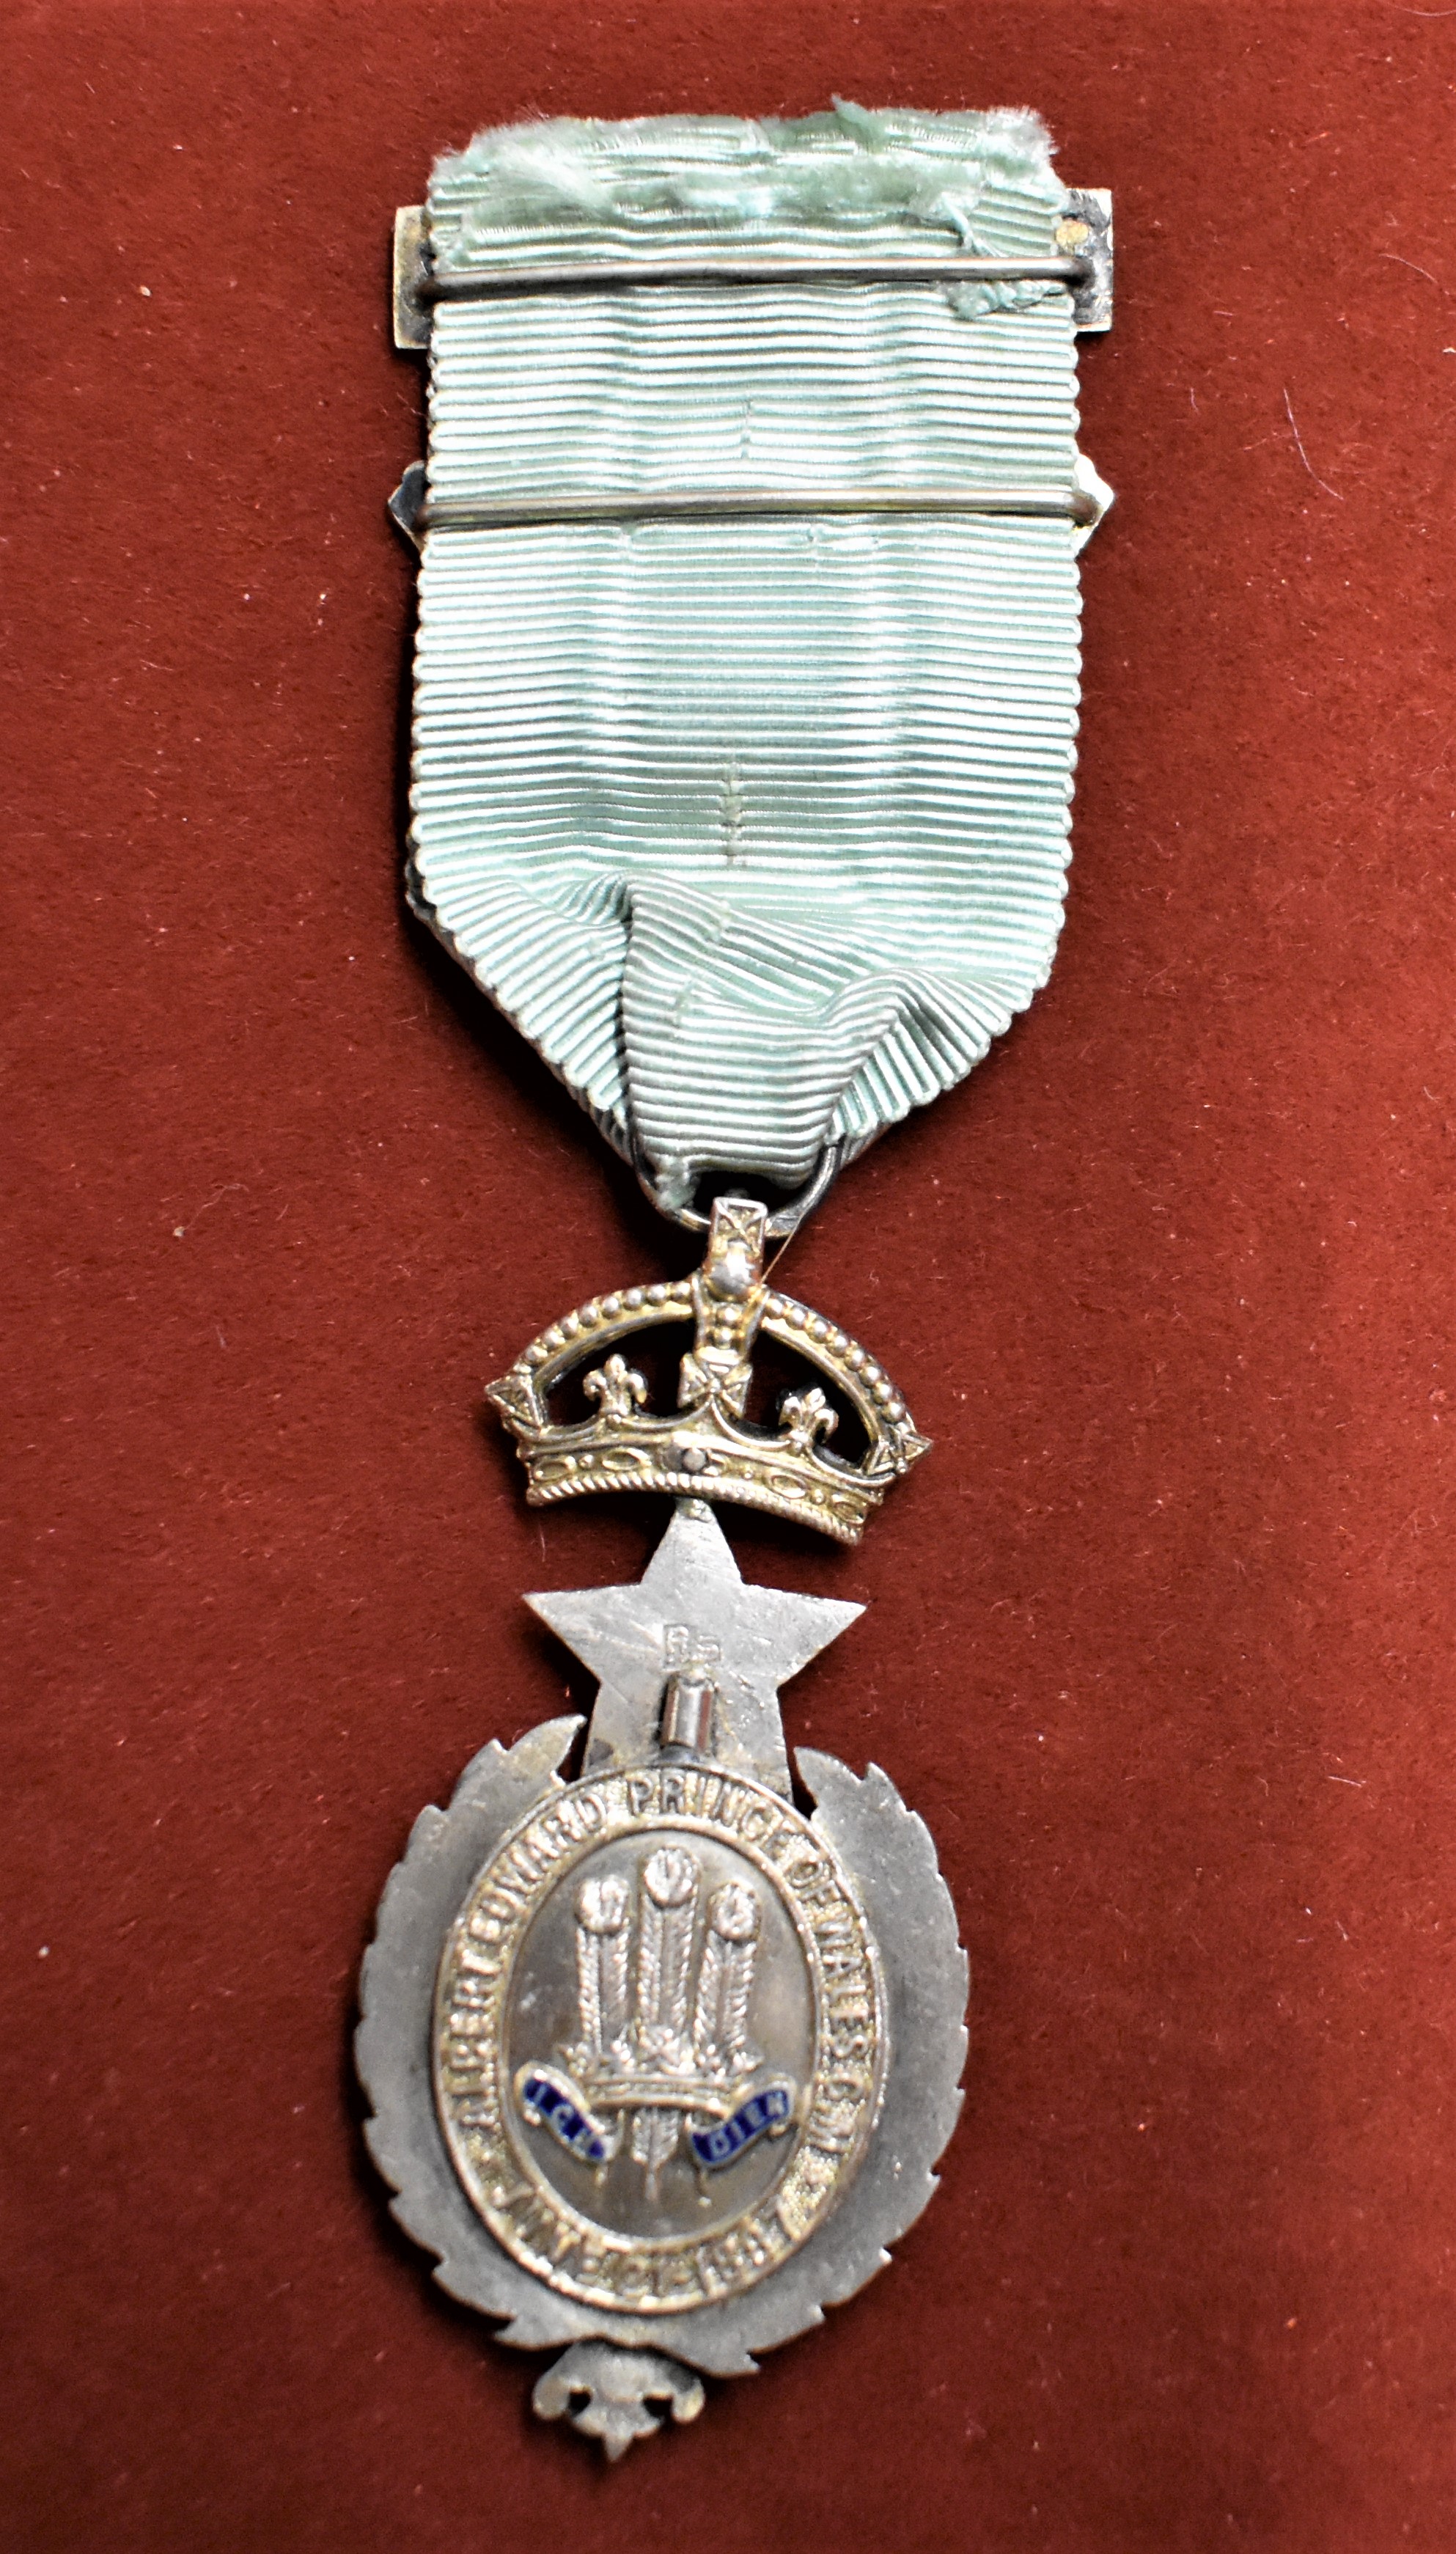 Masonic Queen Victoria's Jubilee Jewel 1837-1897 in silver and enamel, the ribbon having two - Image 2 of 2